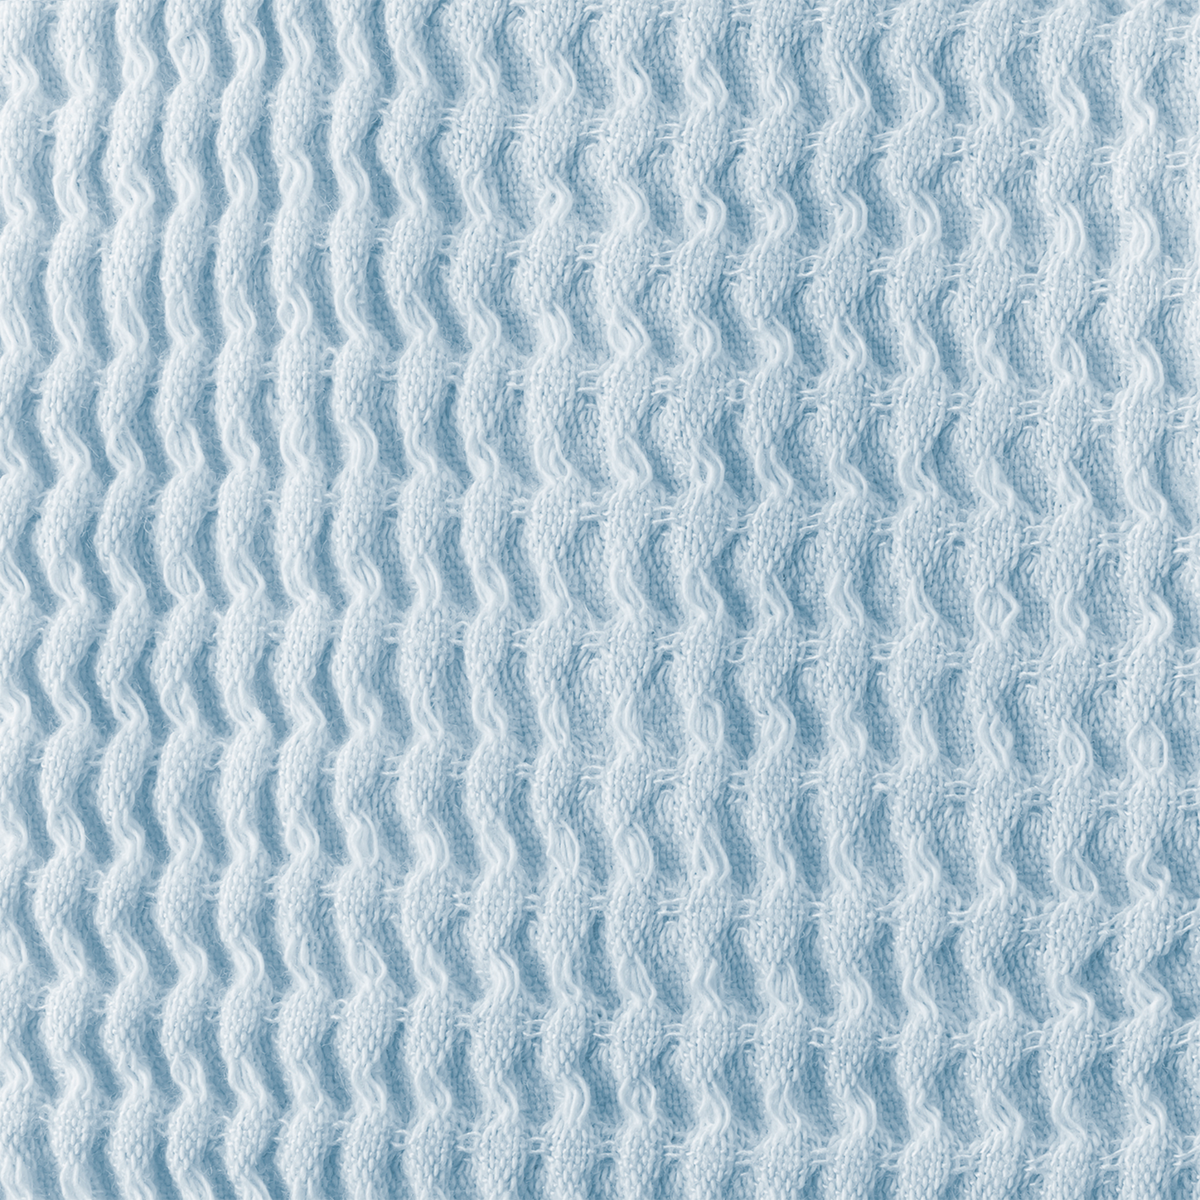 Swatch Sample of Matouk Kiran Waffle Towels in Hydrangea Color